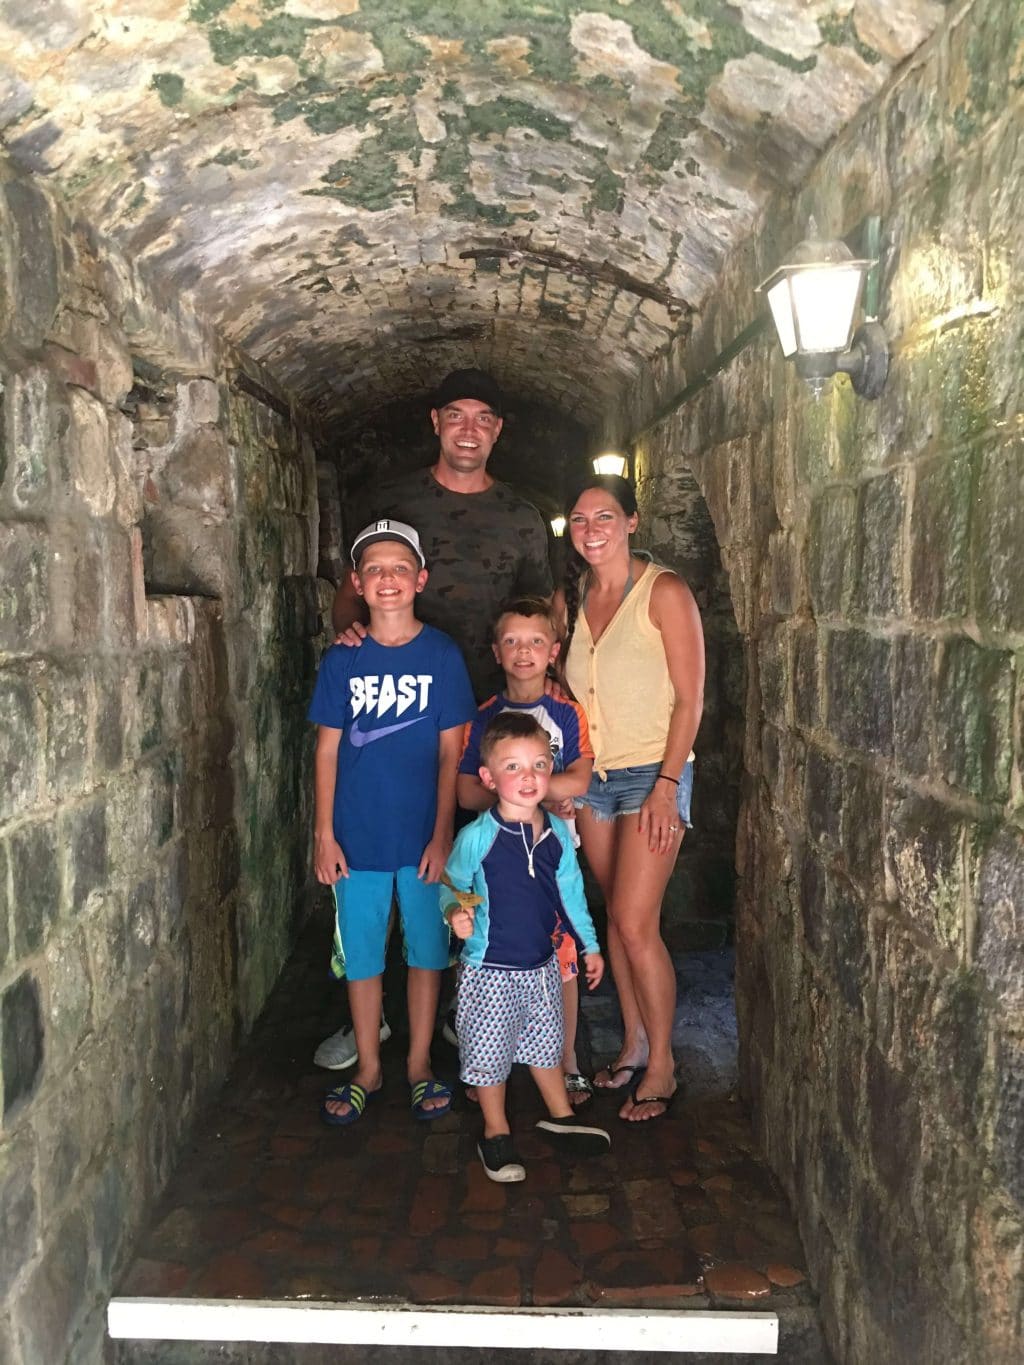 St. Kitts, Family favorite cruise ports, Stilettos and Diapers, Carnival Horizon